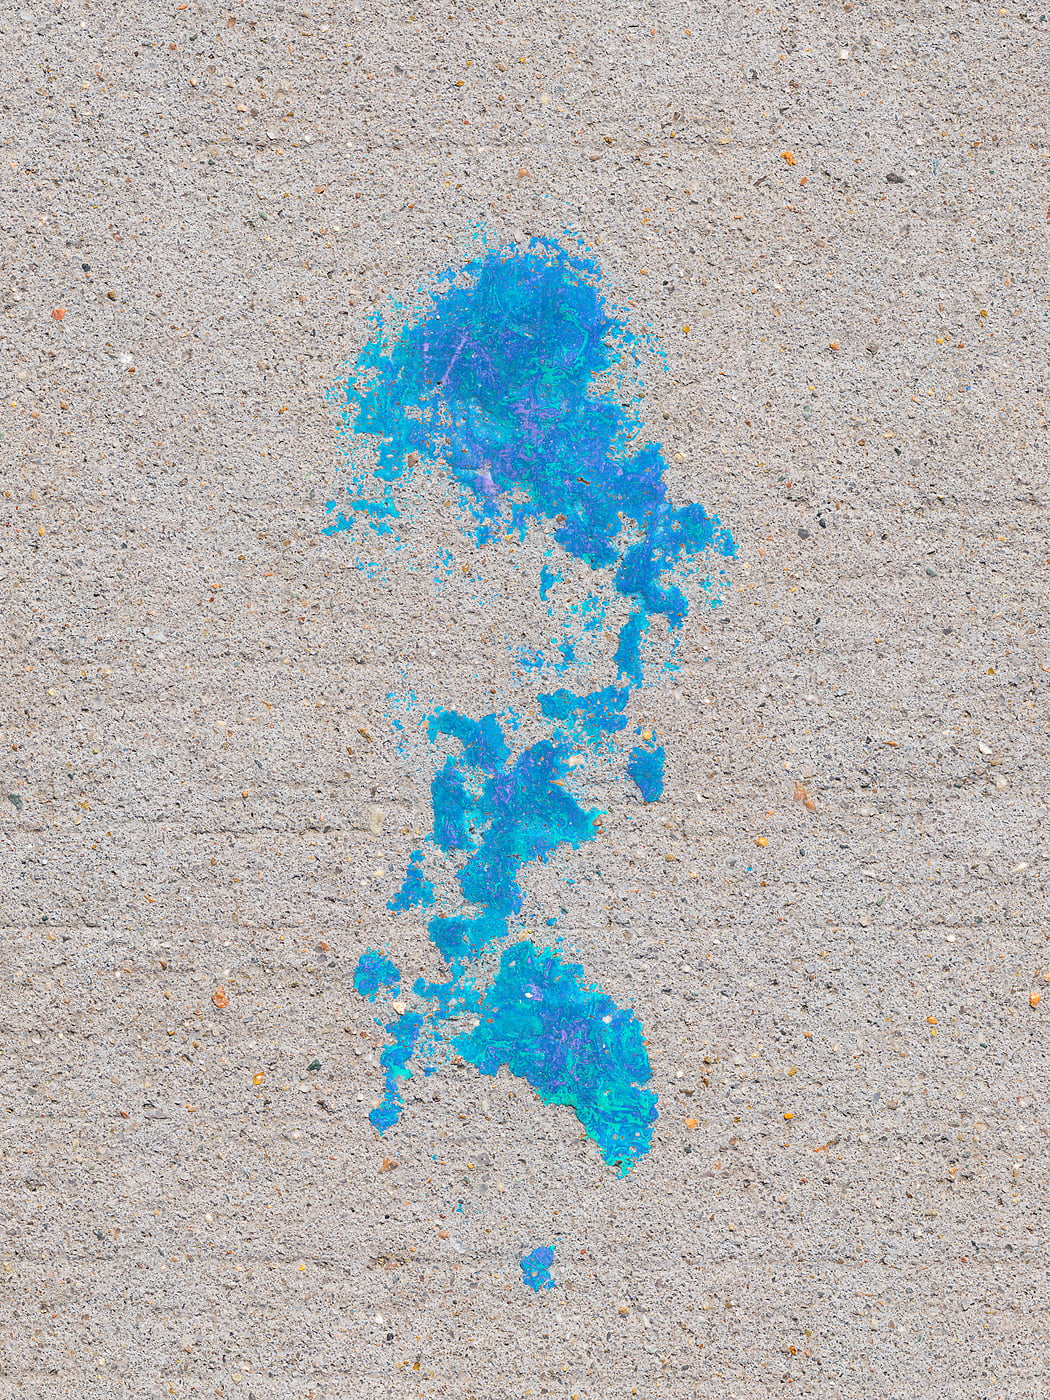 264 megapixels! A very high resolution, large-format VAST photo print of paint on the New York City sidewalk; abstract photograph created by Dan Piech in Manhattan, New York City.